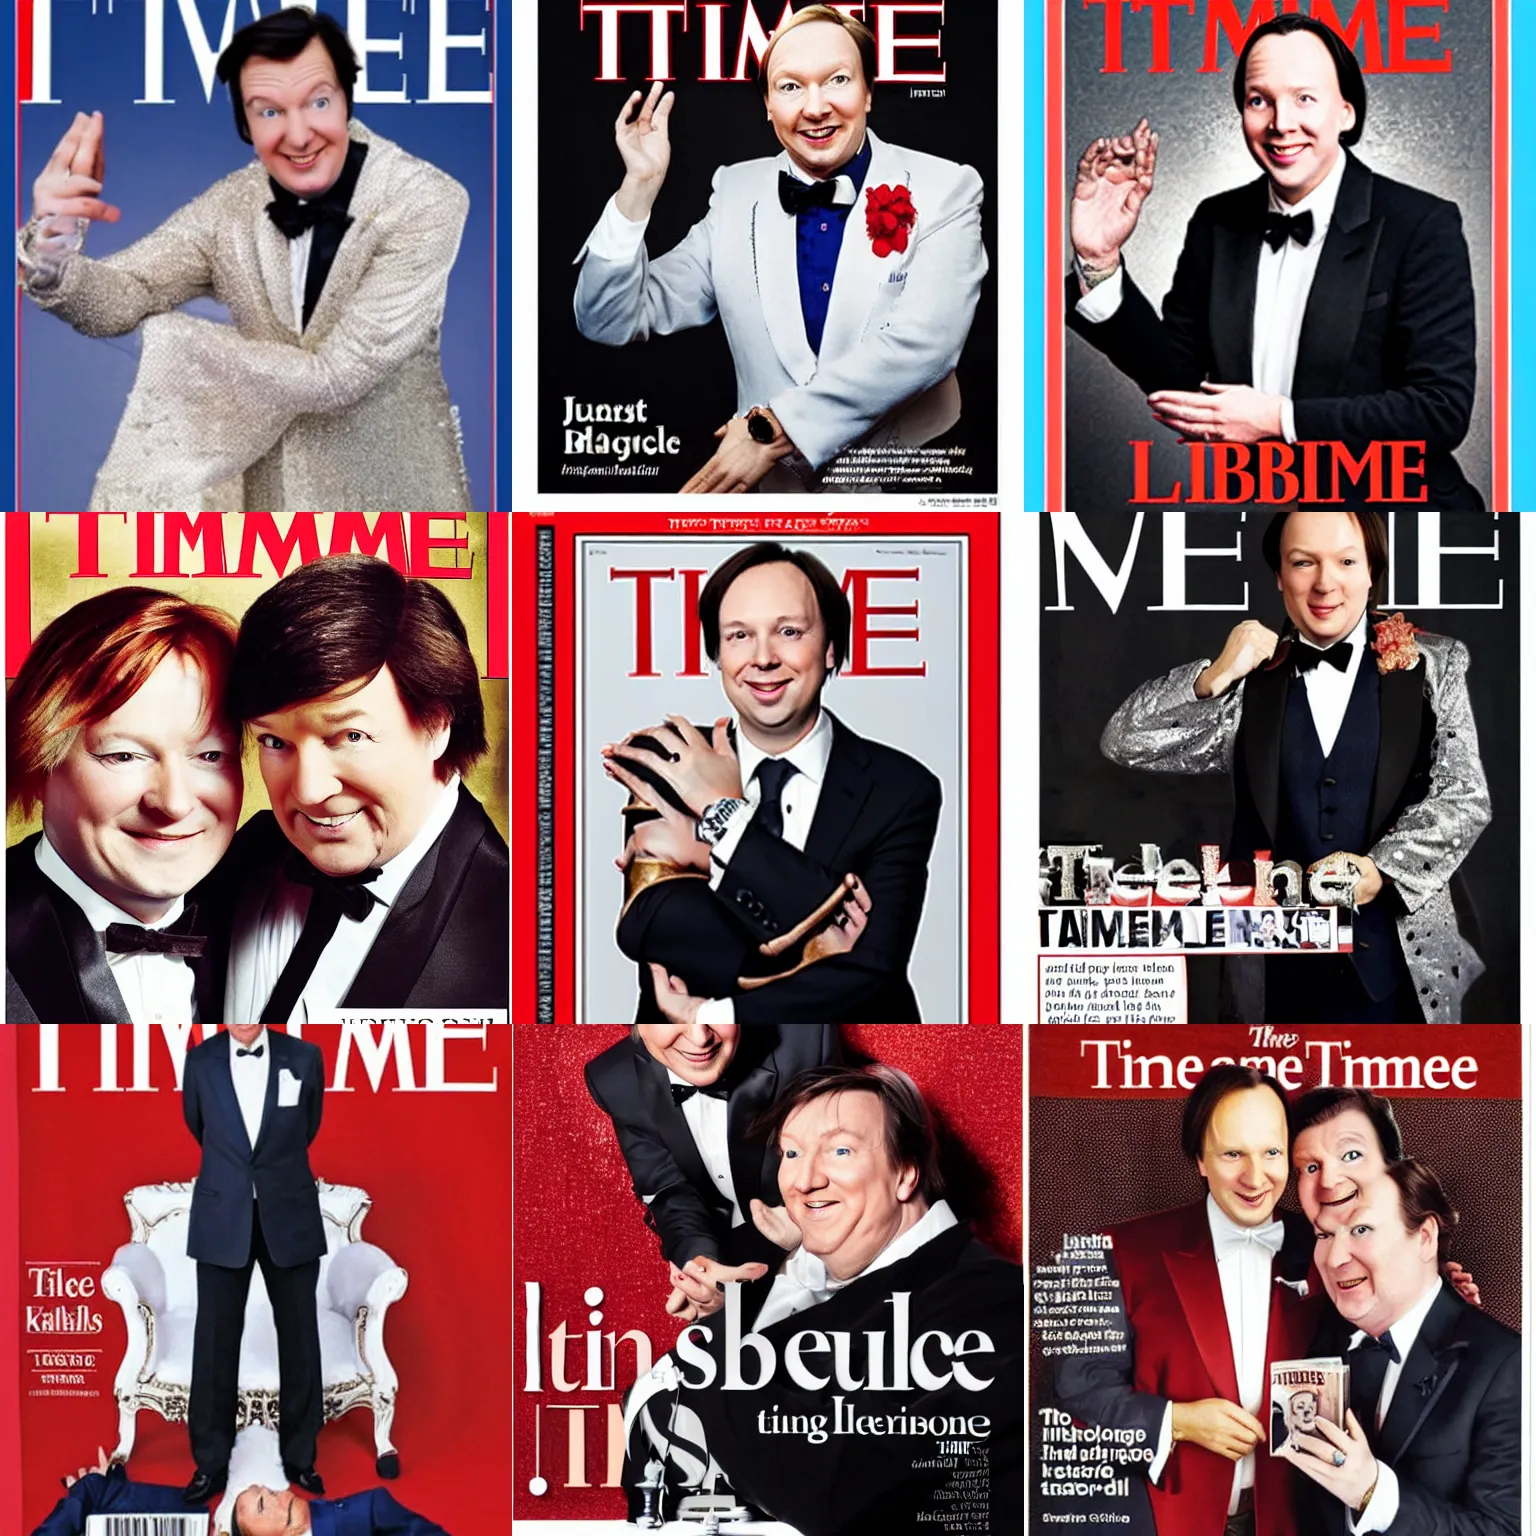 Prompt: Jussi Halla-aho embracing Liberace, Time magazine cover